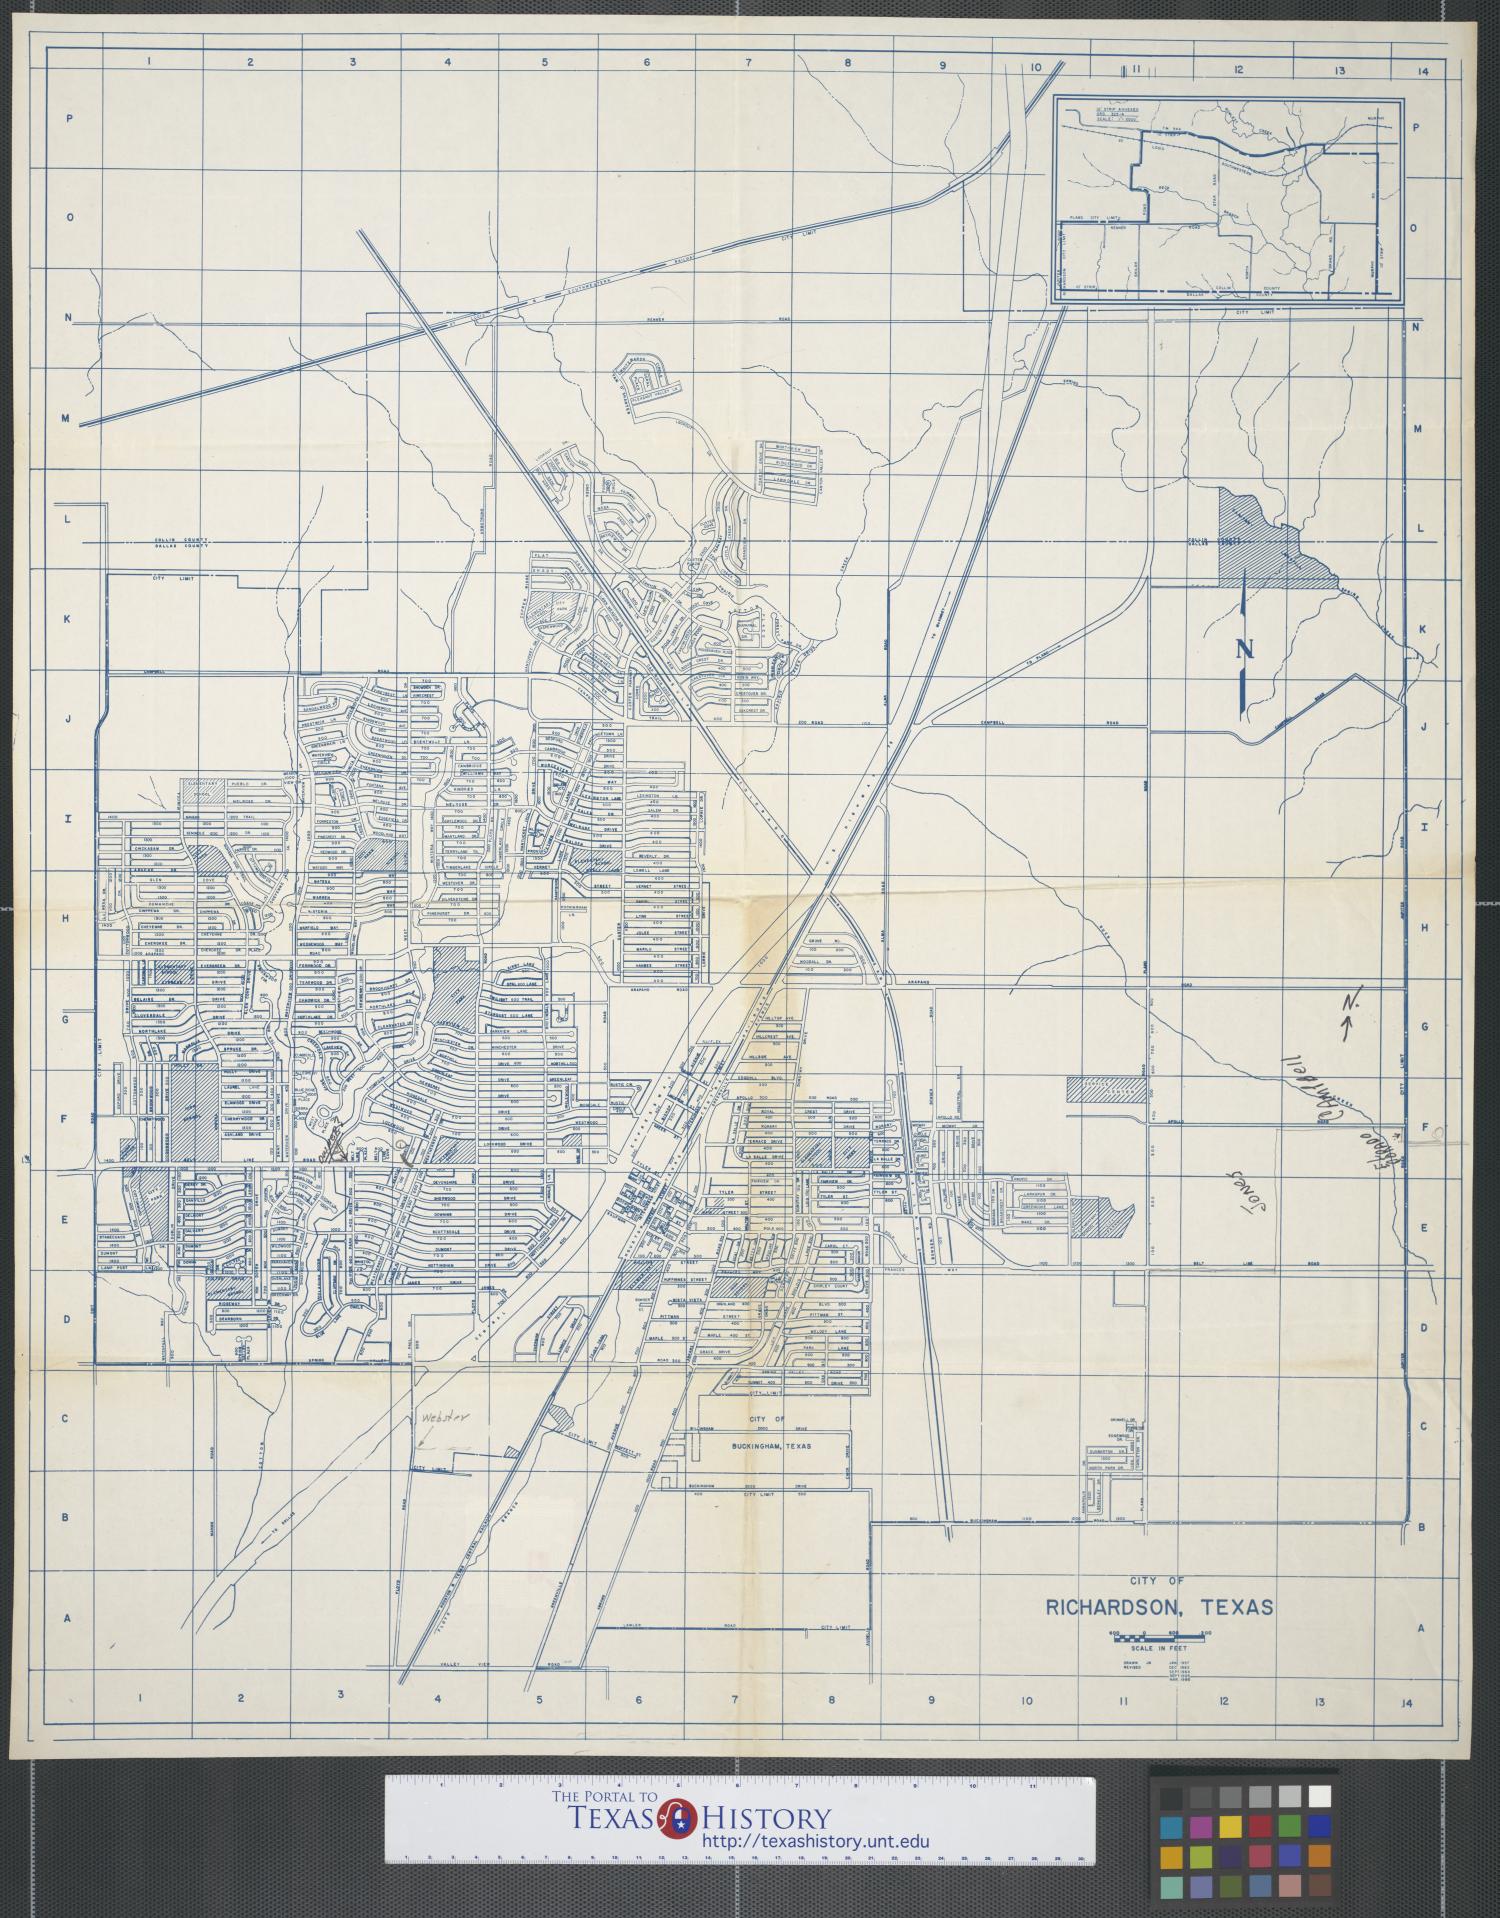 [Map of] City of Richardson, Texas, Map of Richardson, Texas. The town boundaries are marked as well as the streets, land divisions, and creeks. Scale 1:1,200., 